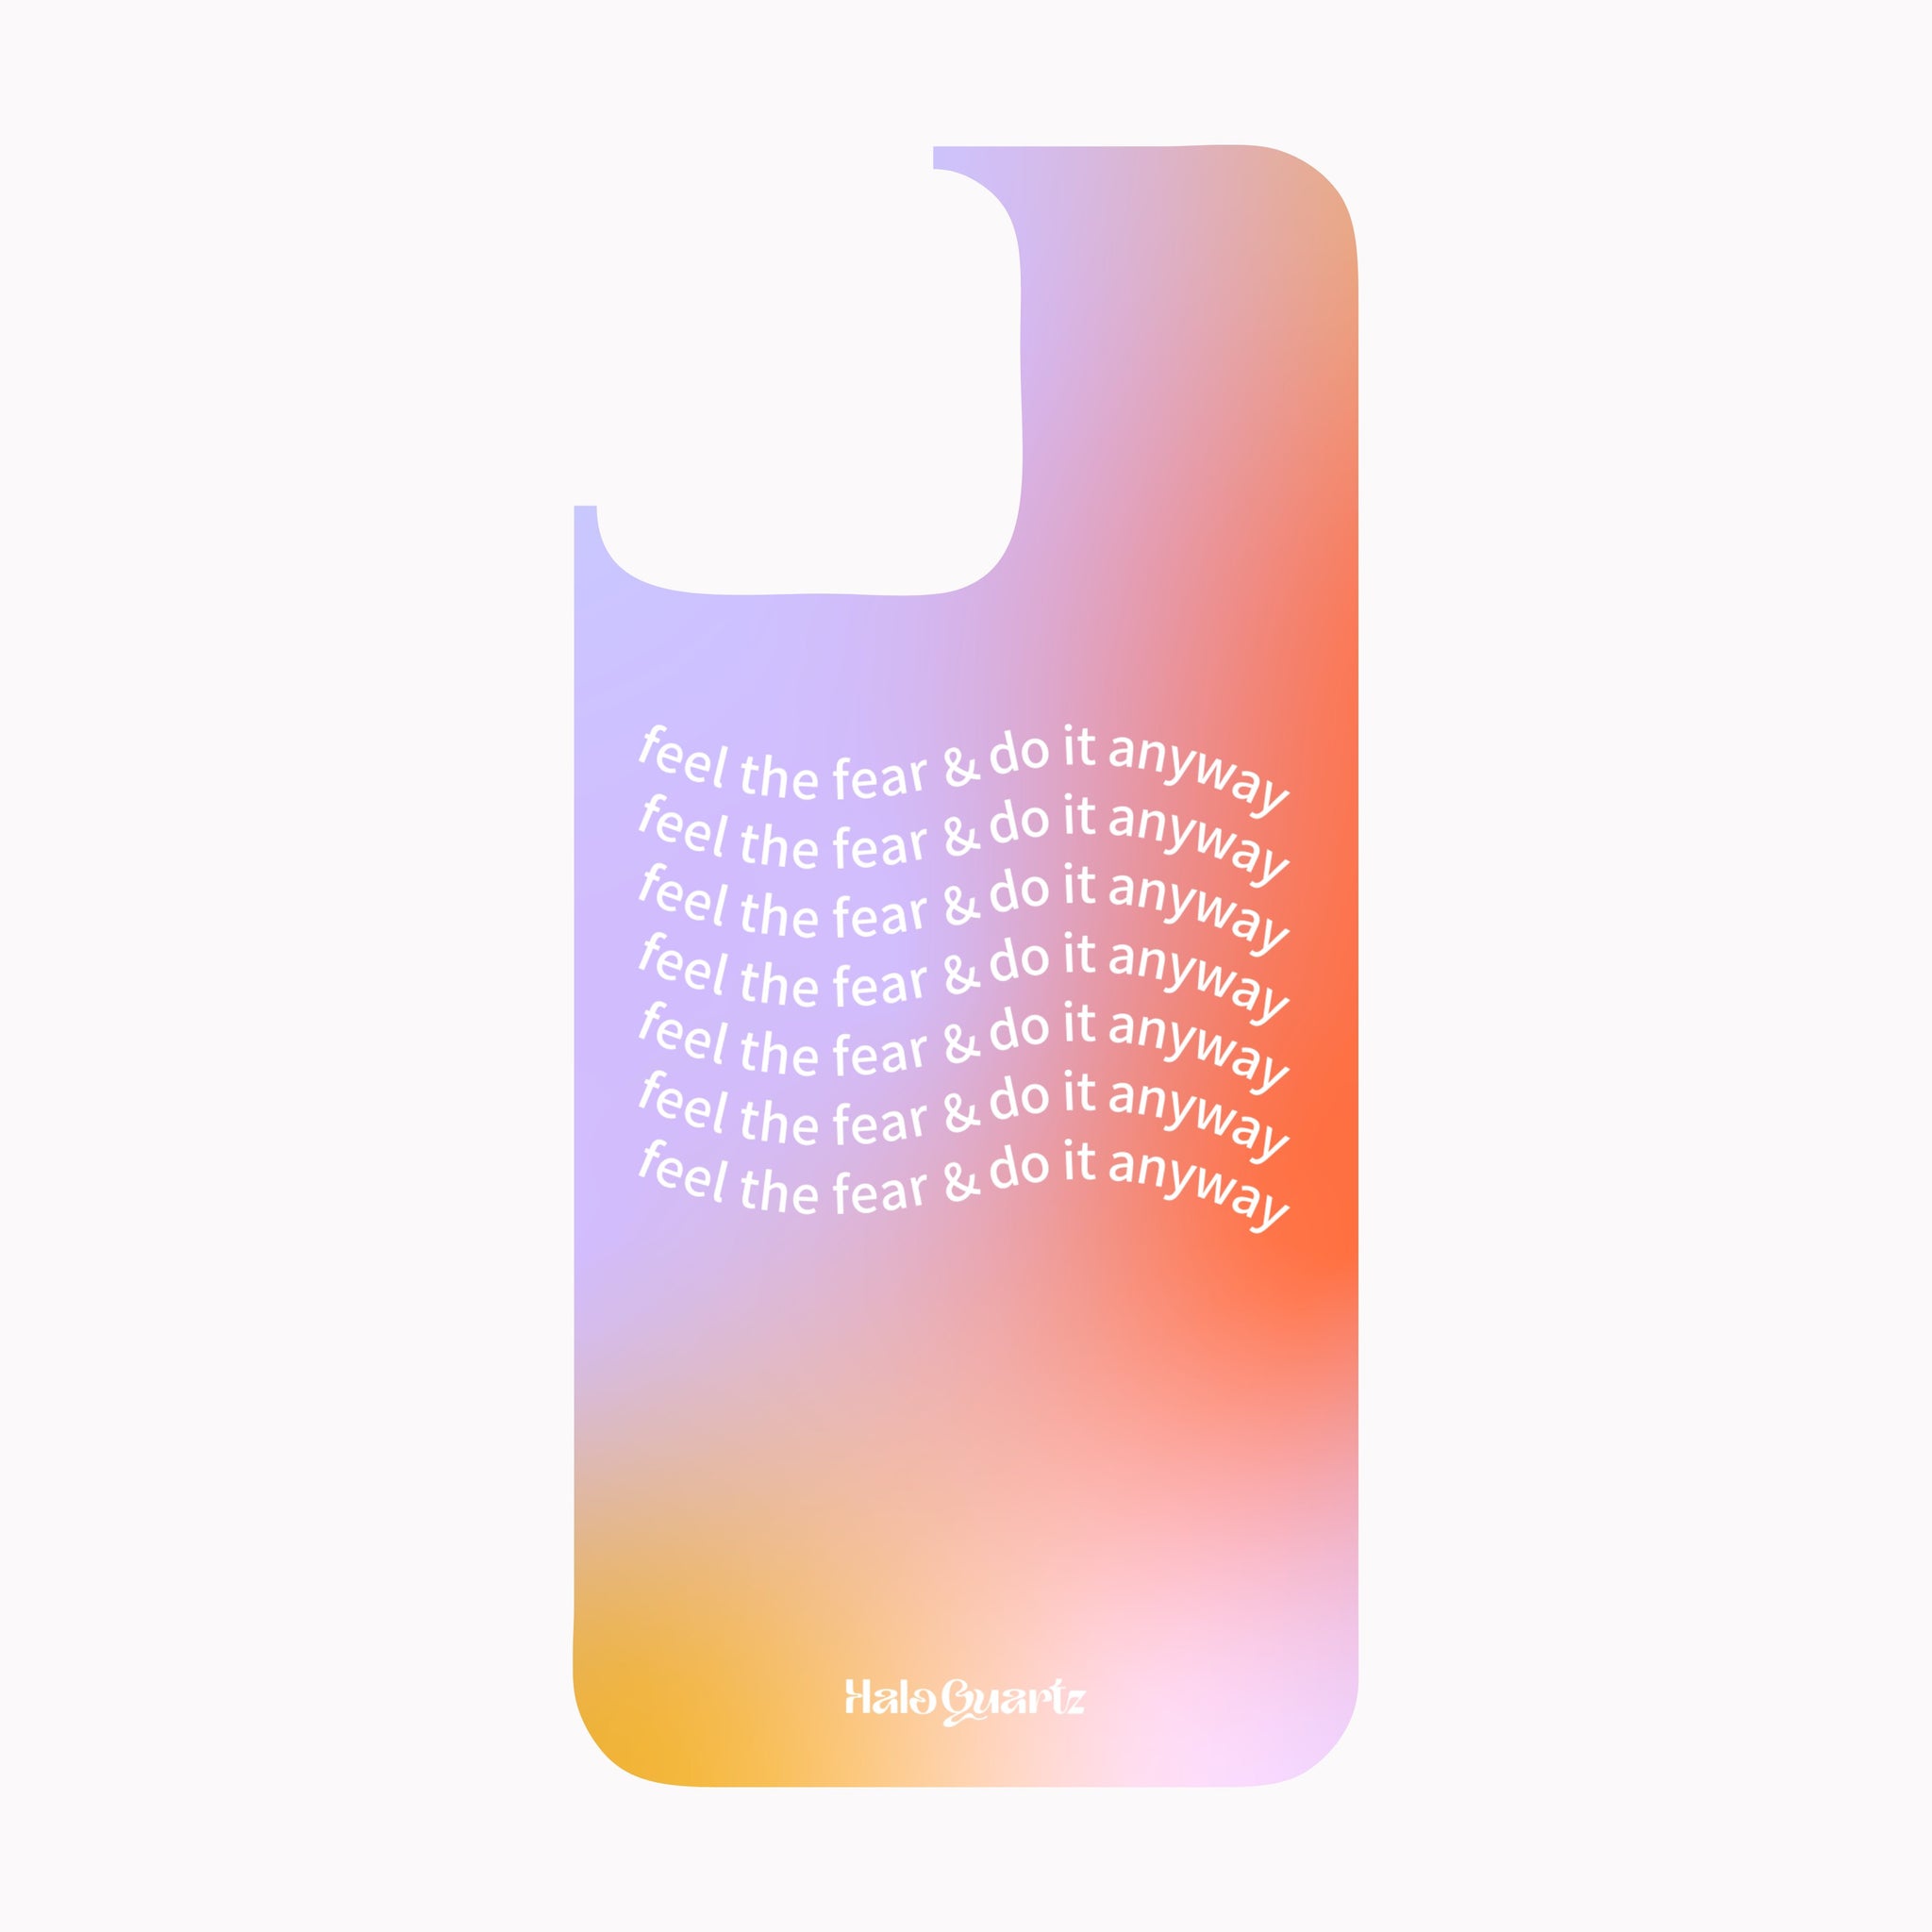 Feel The Fear & Do It Anyway - Phone Case (Assorted Colours) Halo Quartz 